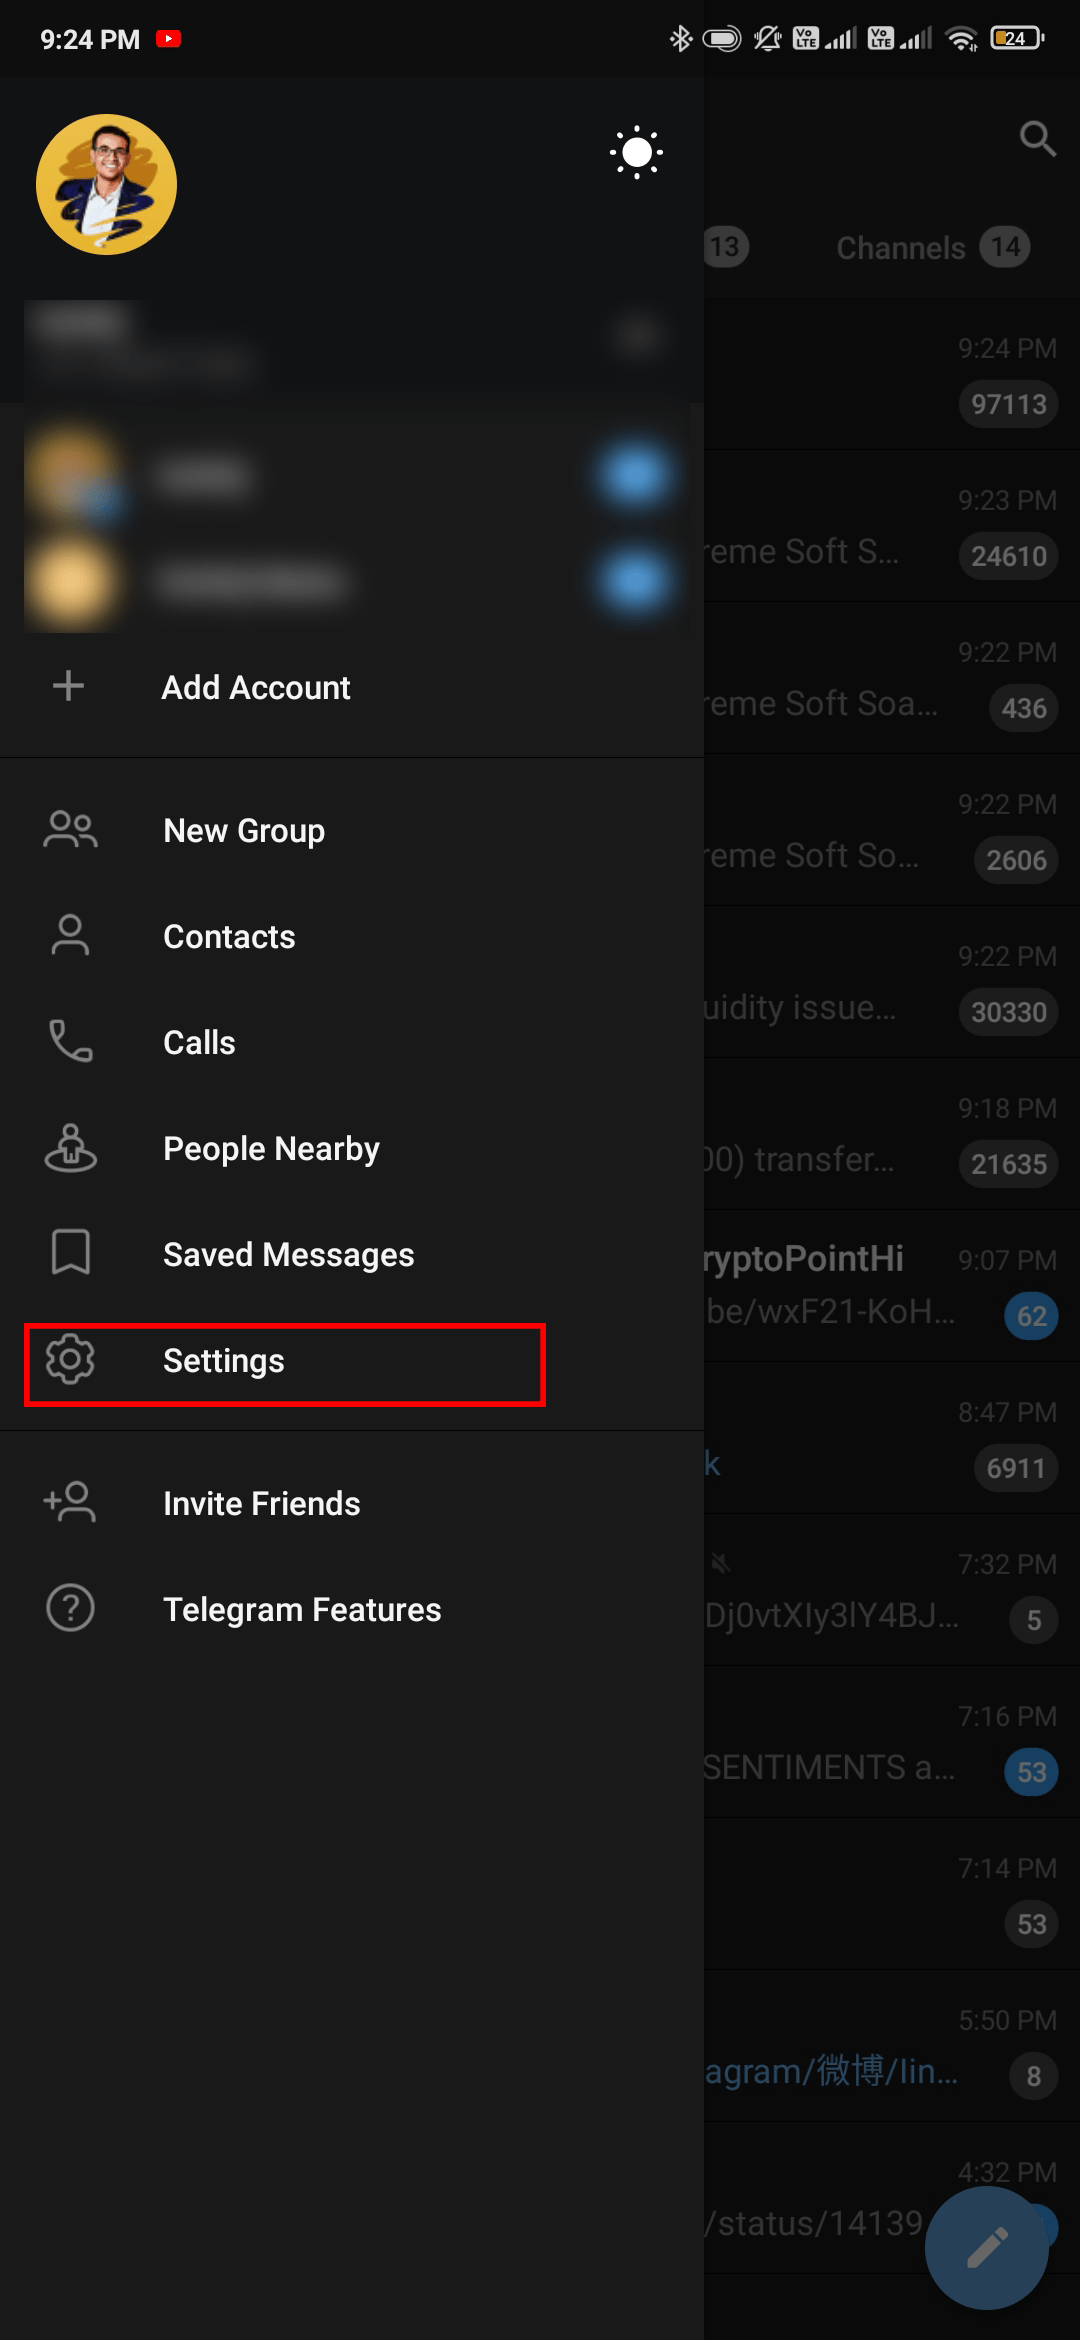 tap on the menu and tap on settings